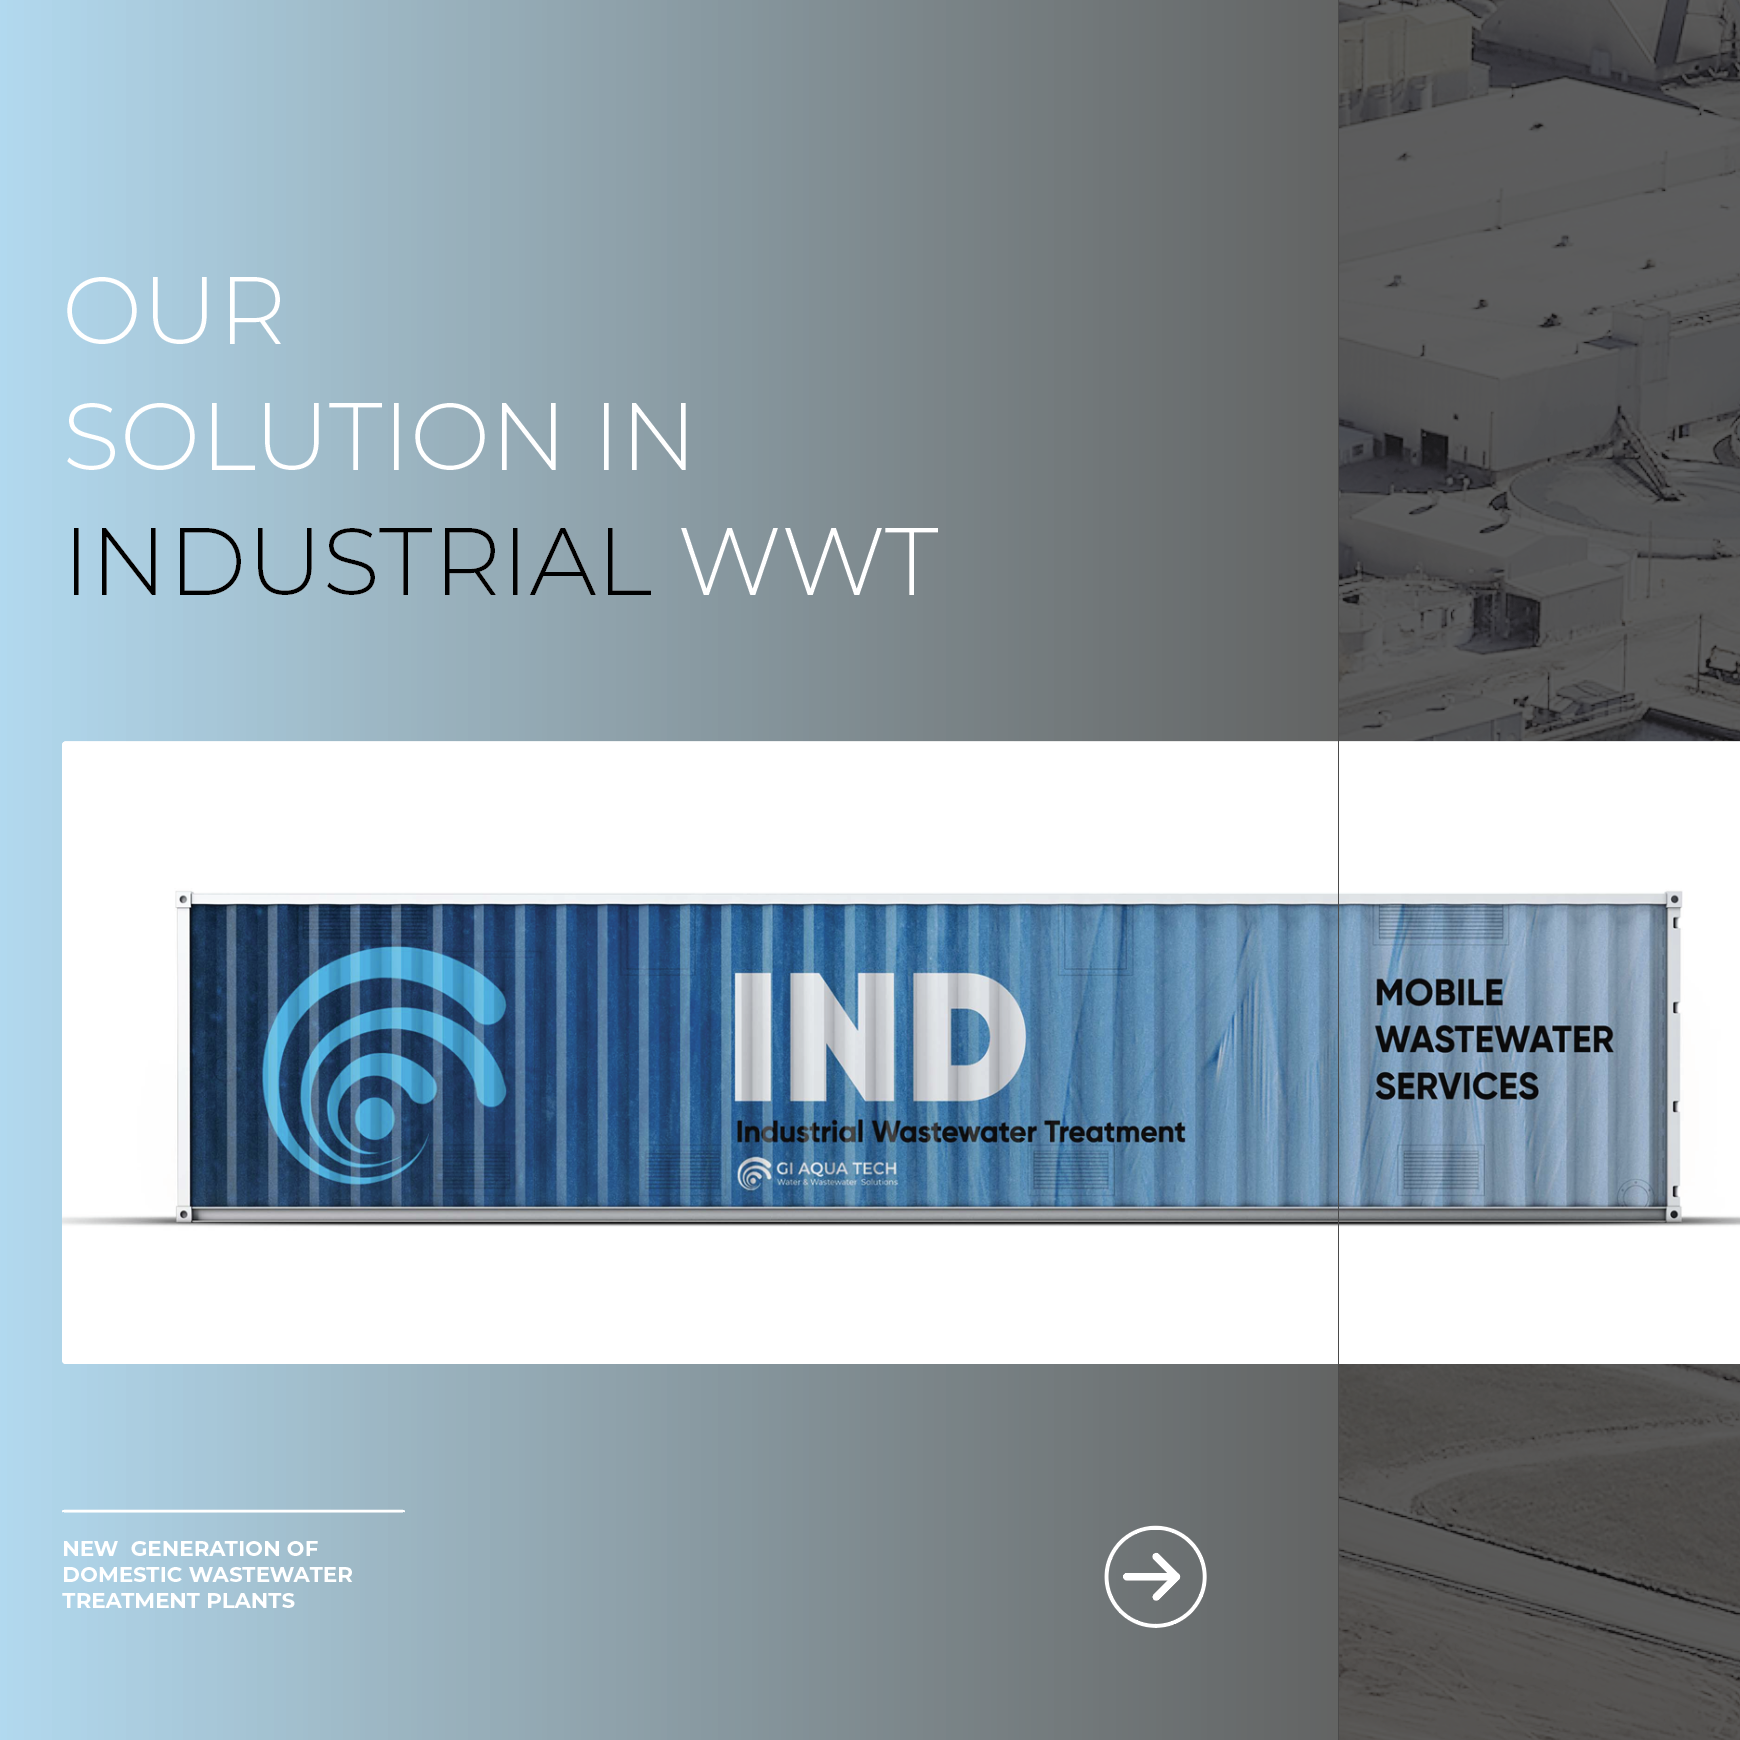 Our solution in industrial WWT